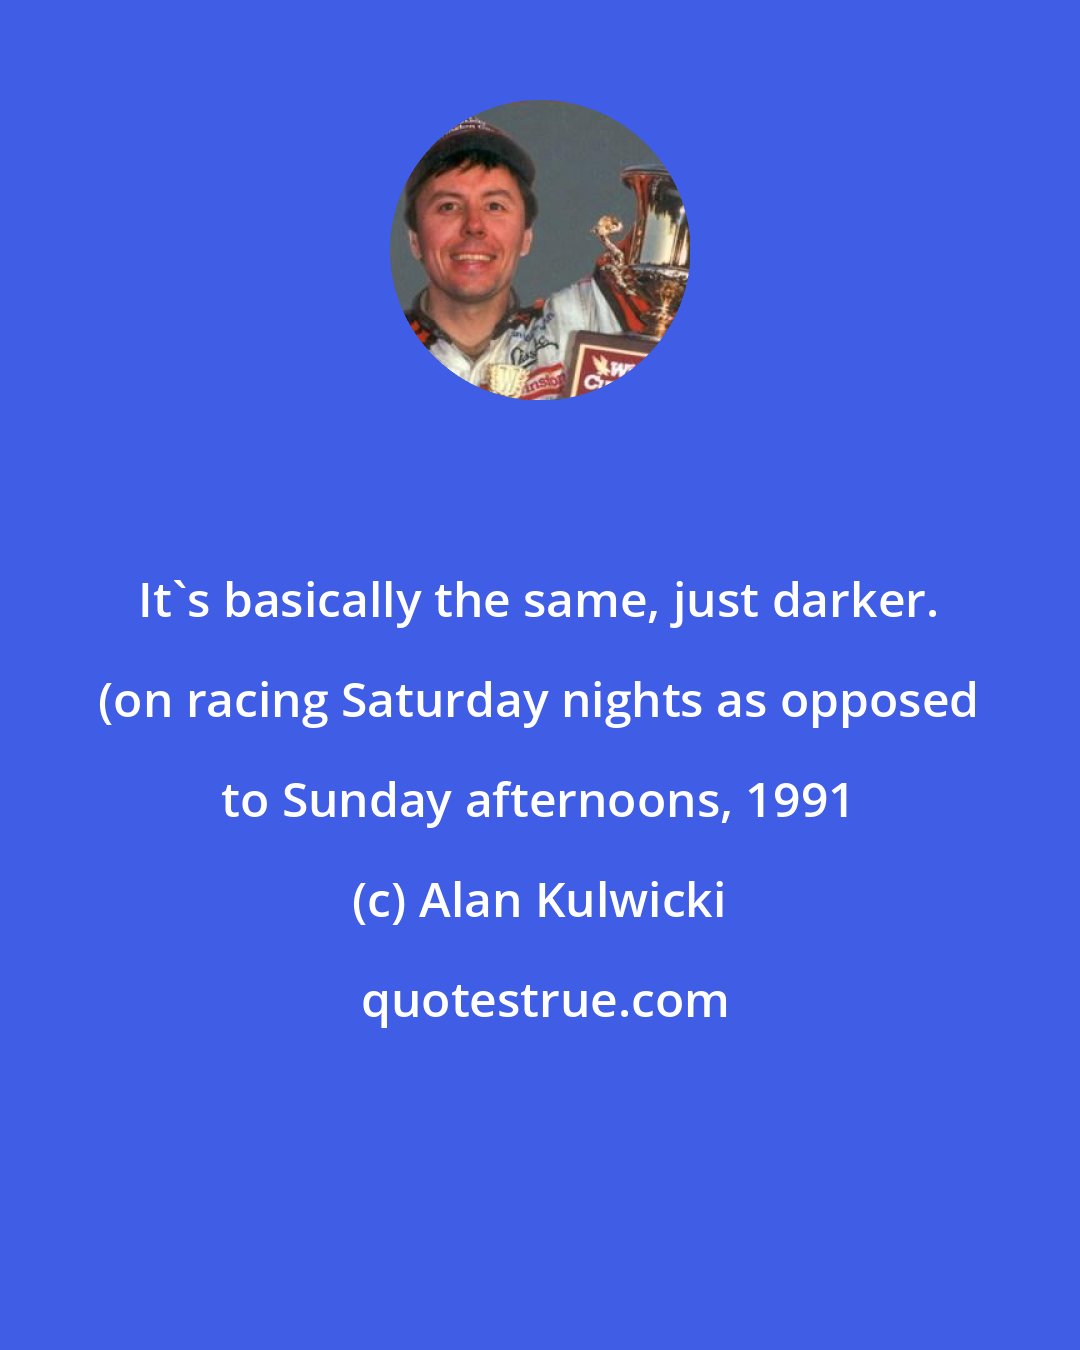 Alan Kulwicki: It's basically the same, just darker. (on racing Saturday nights as opposed to Sunday afternoons, 1991